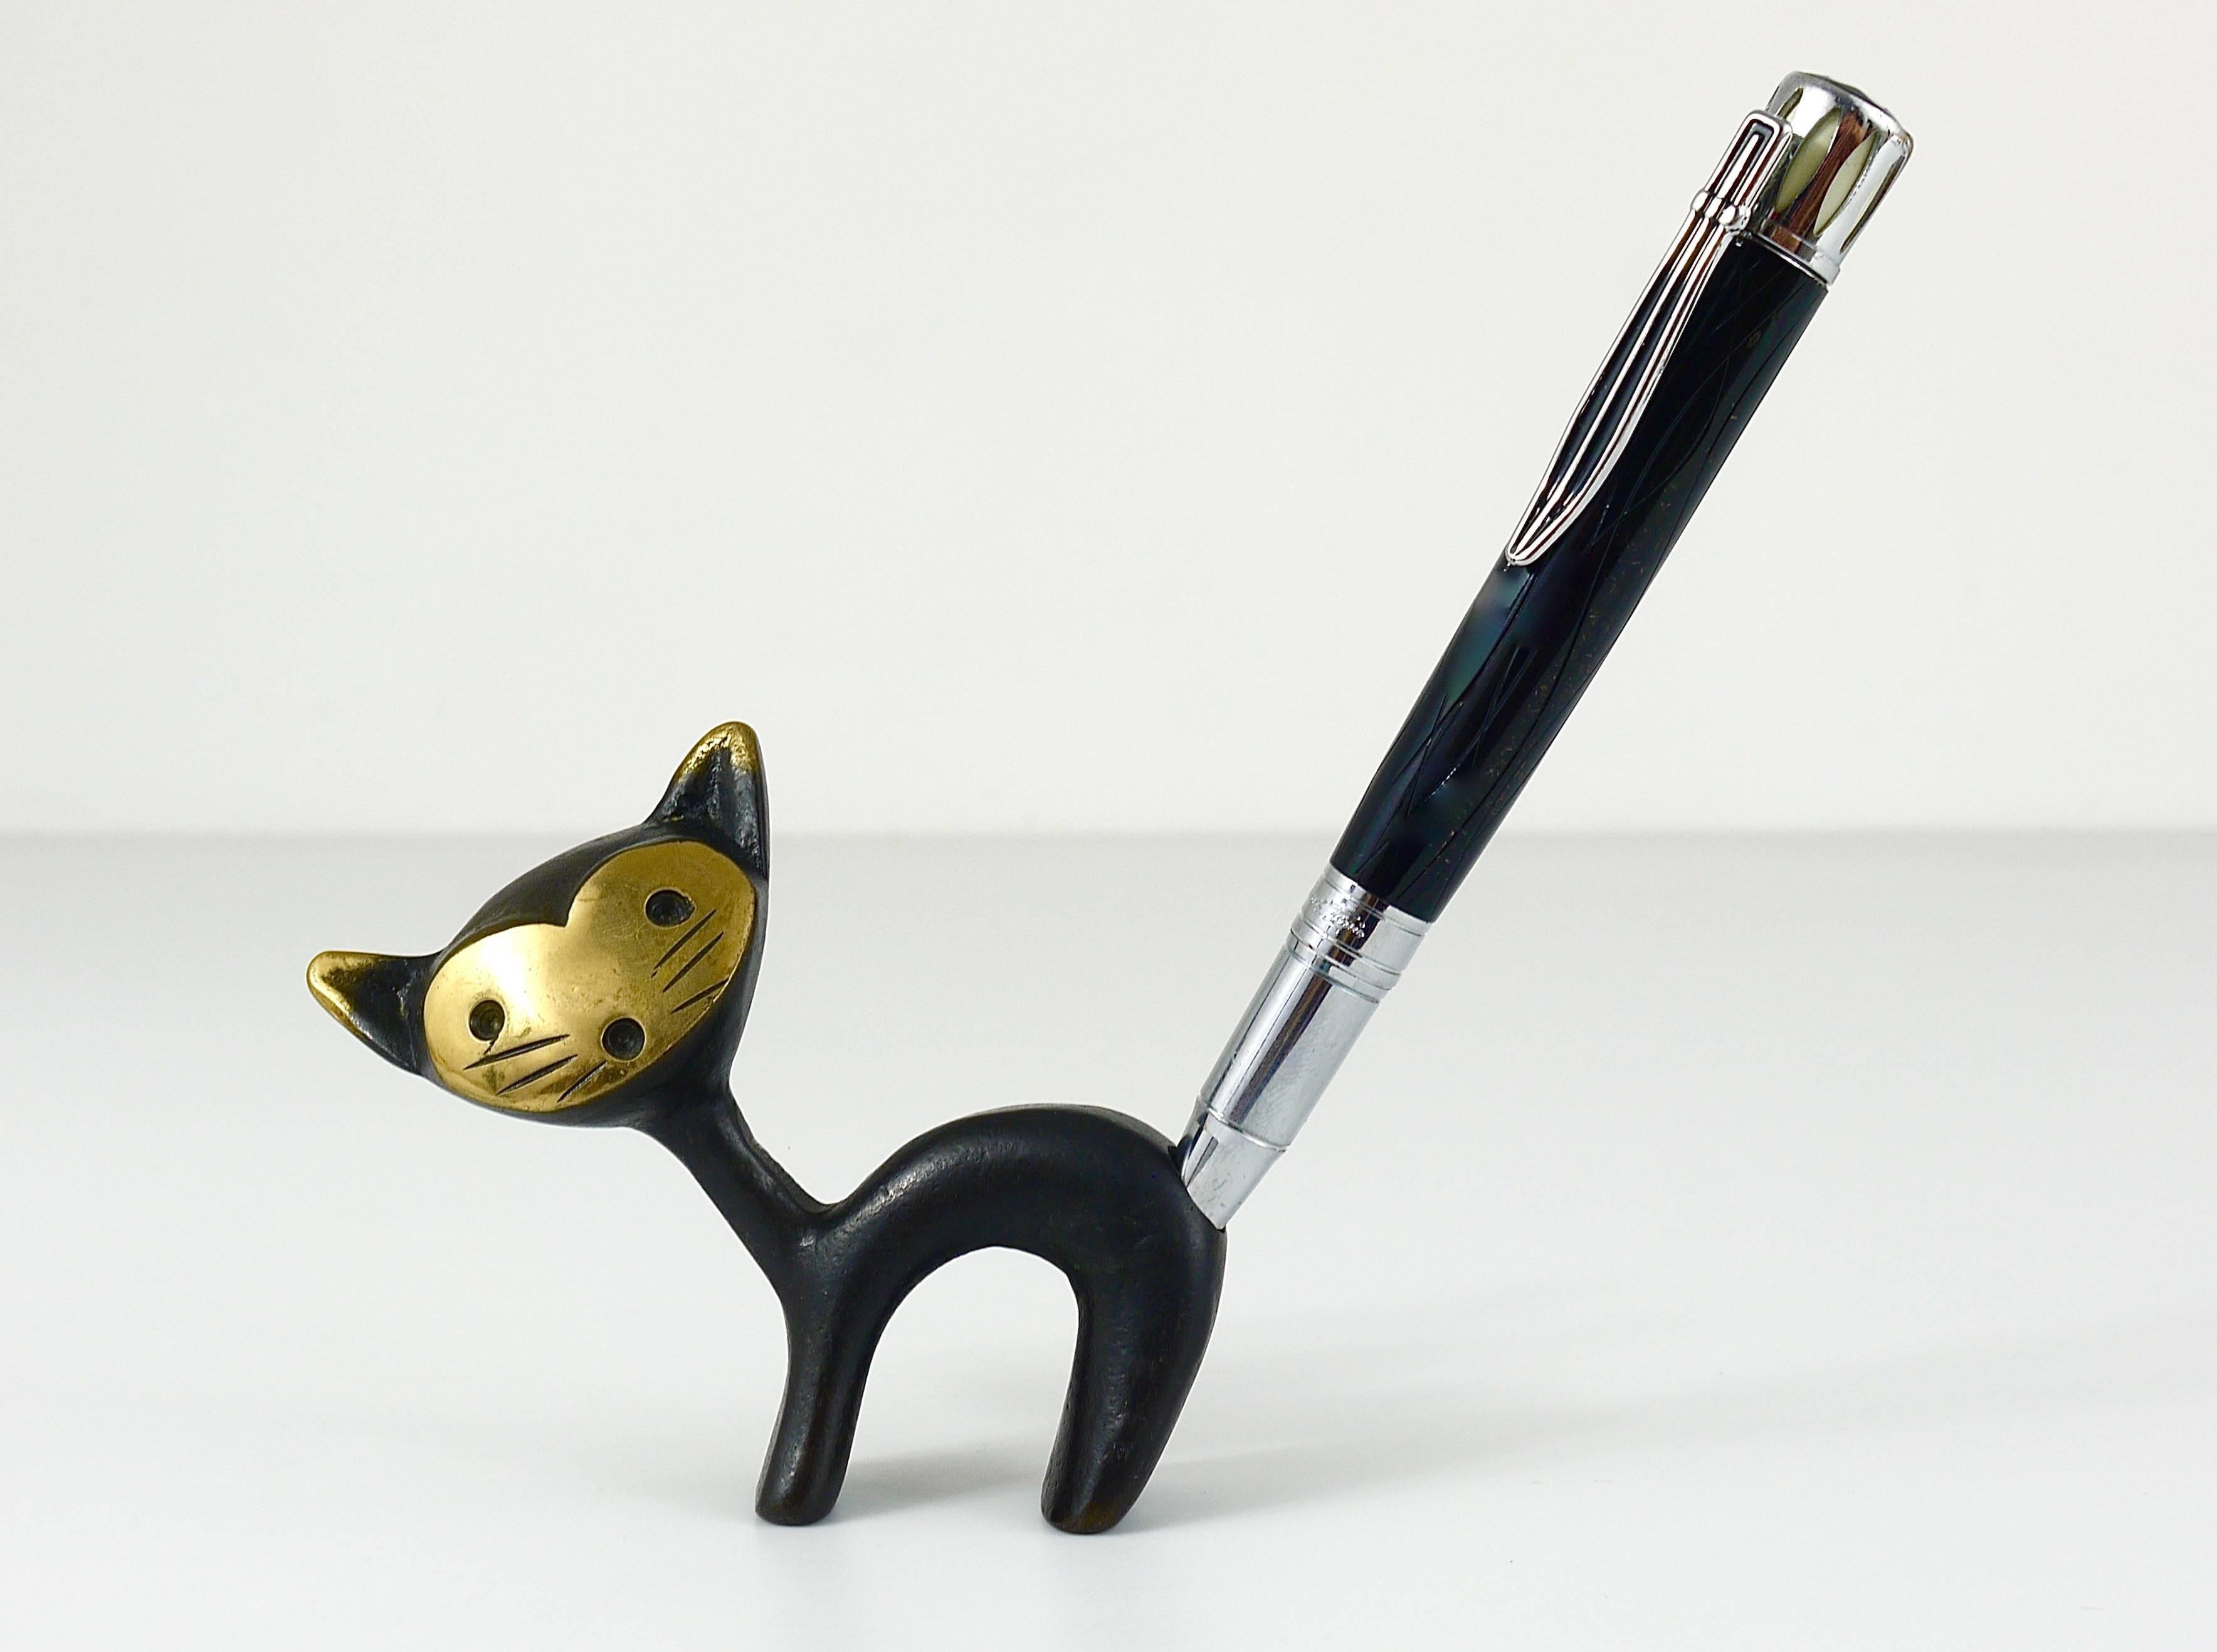 A very charming Austrian, Mid-Century pen or pencil holder, displaying a cat. A very humorous design by Walter Bosse executed by Hertha Baller Austria in the 1950s. Made of brass in excellent condition.